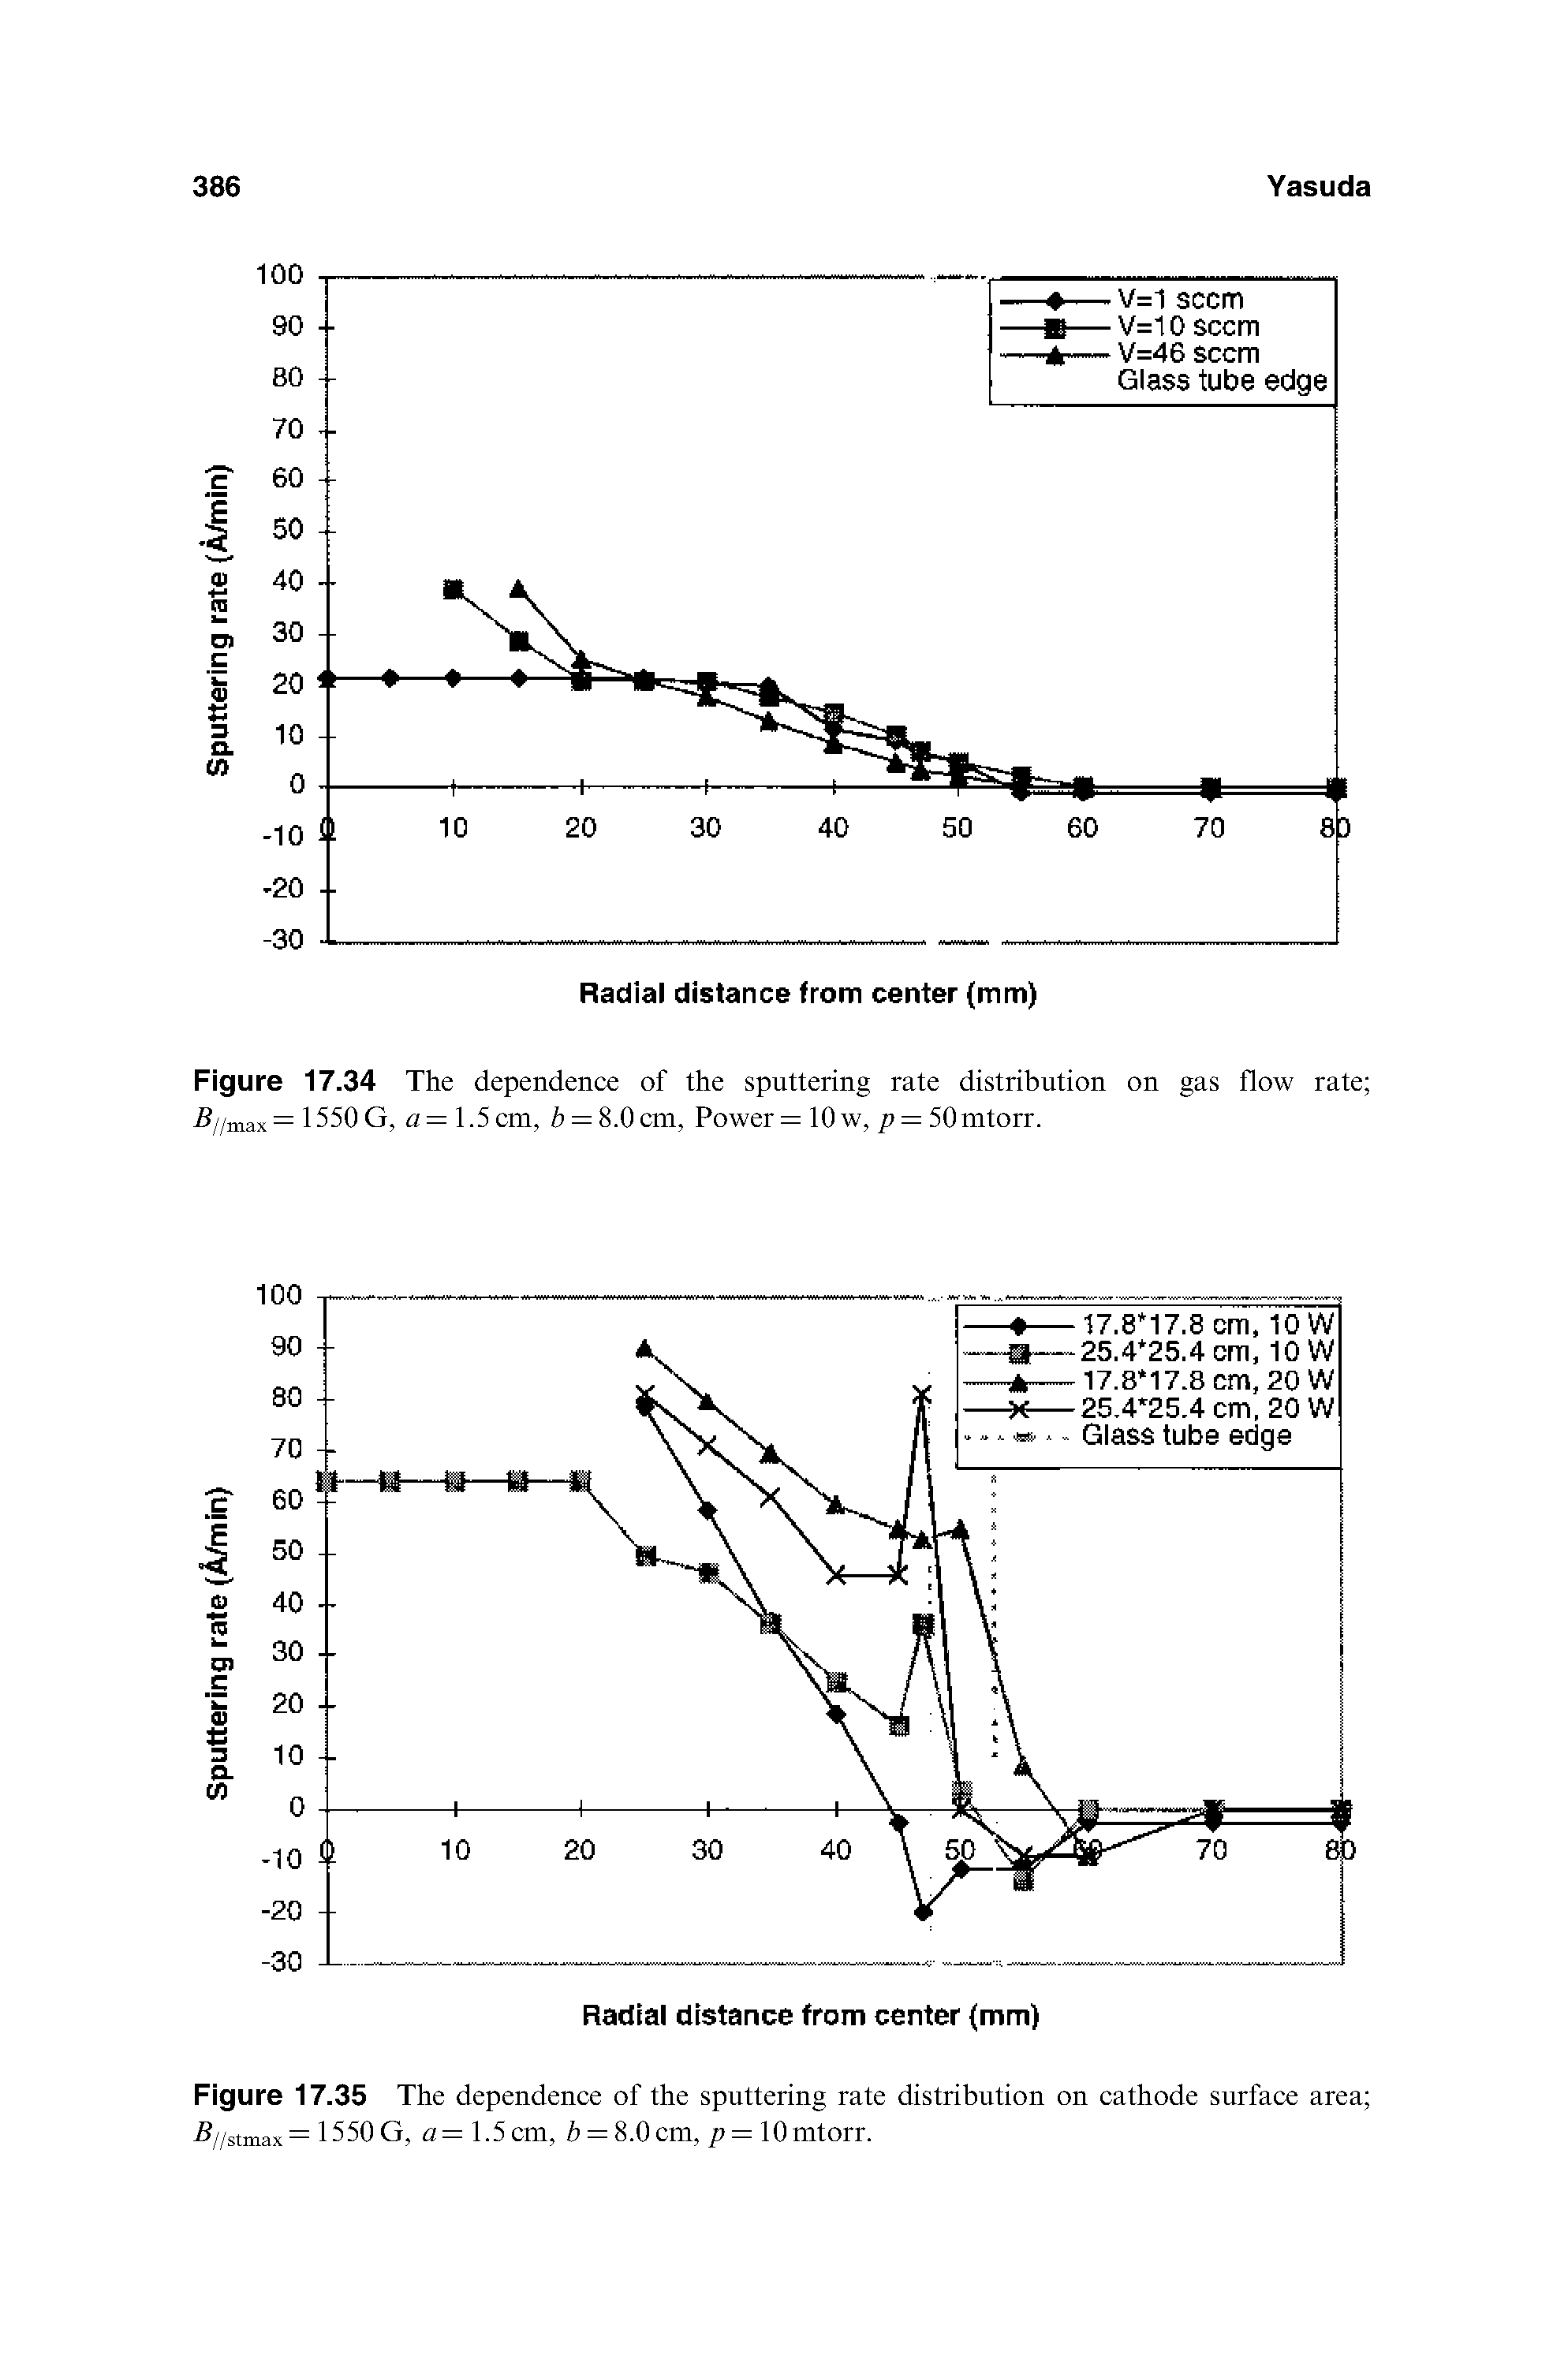 Figure 17.35 The dependence of the sputtering rate distribution on cathode surface area 7 //stmax= 1550G, a= 1.5cm, 6 = 8.0cm, p= lOmtorr.